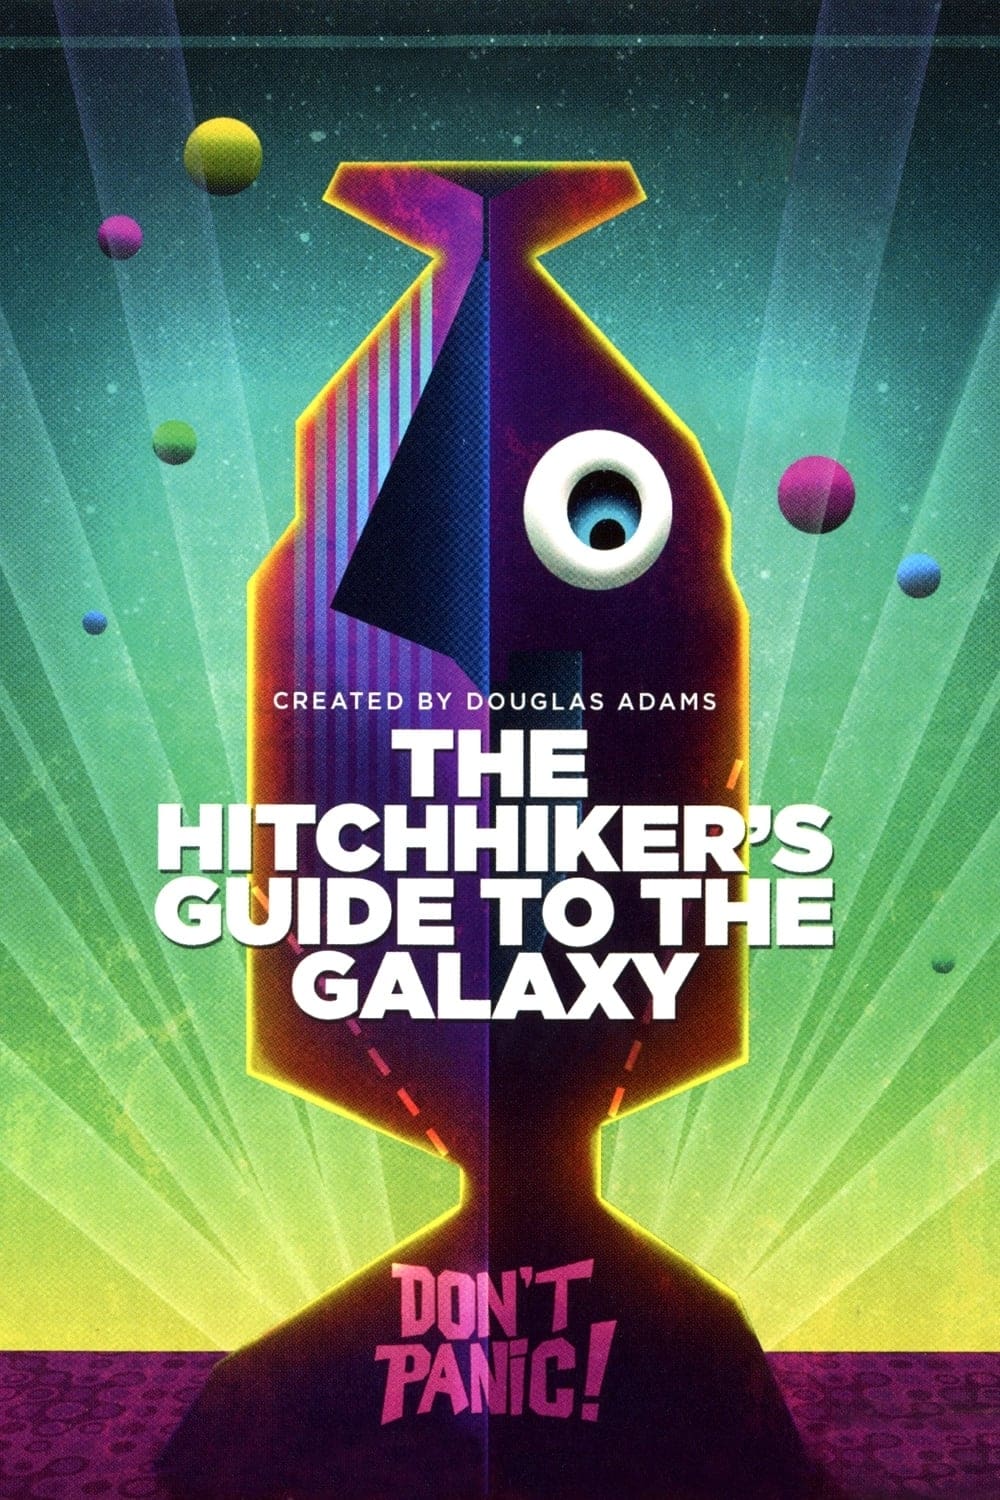 The Hitch Hikers Guide to the Galaxy film